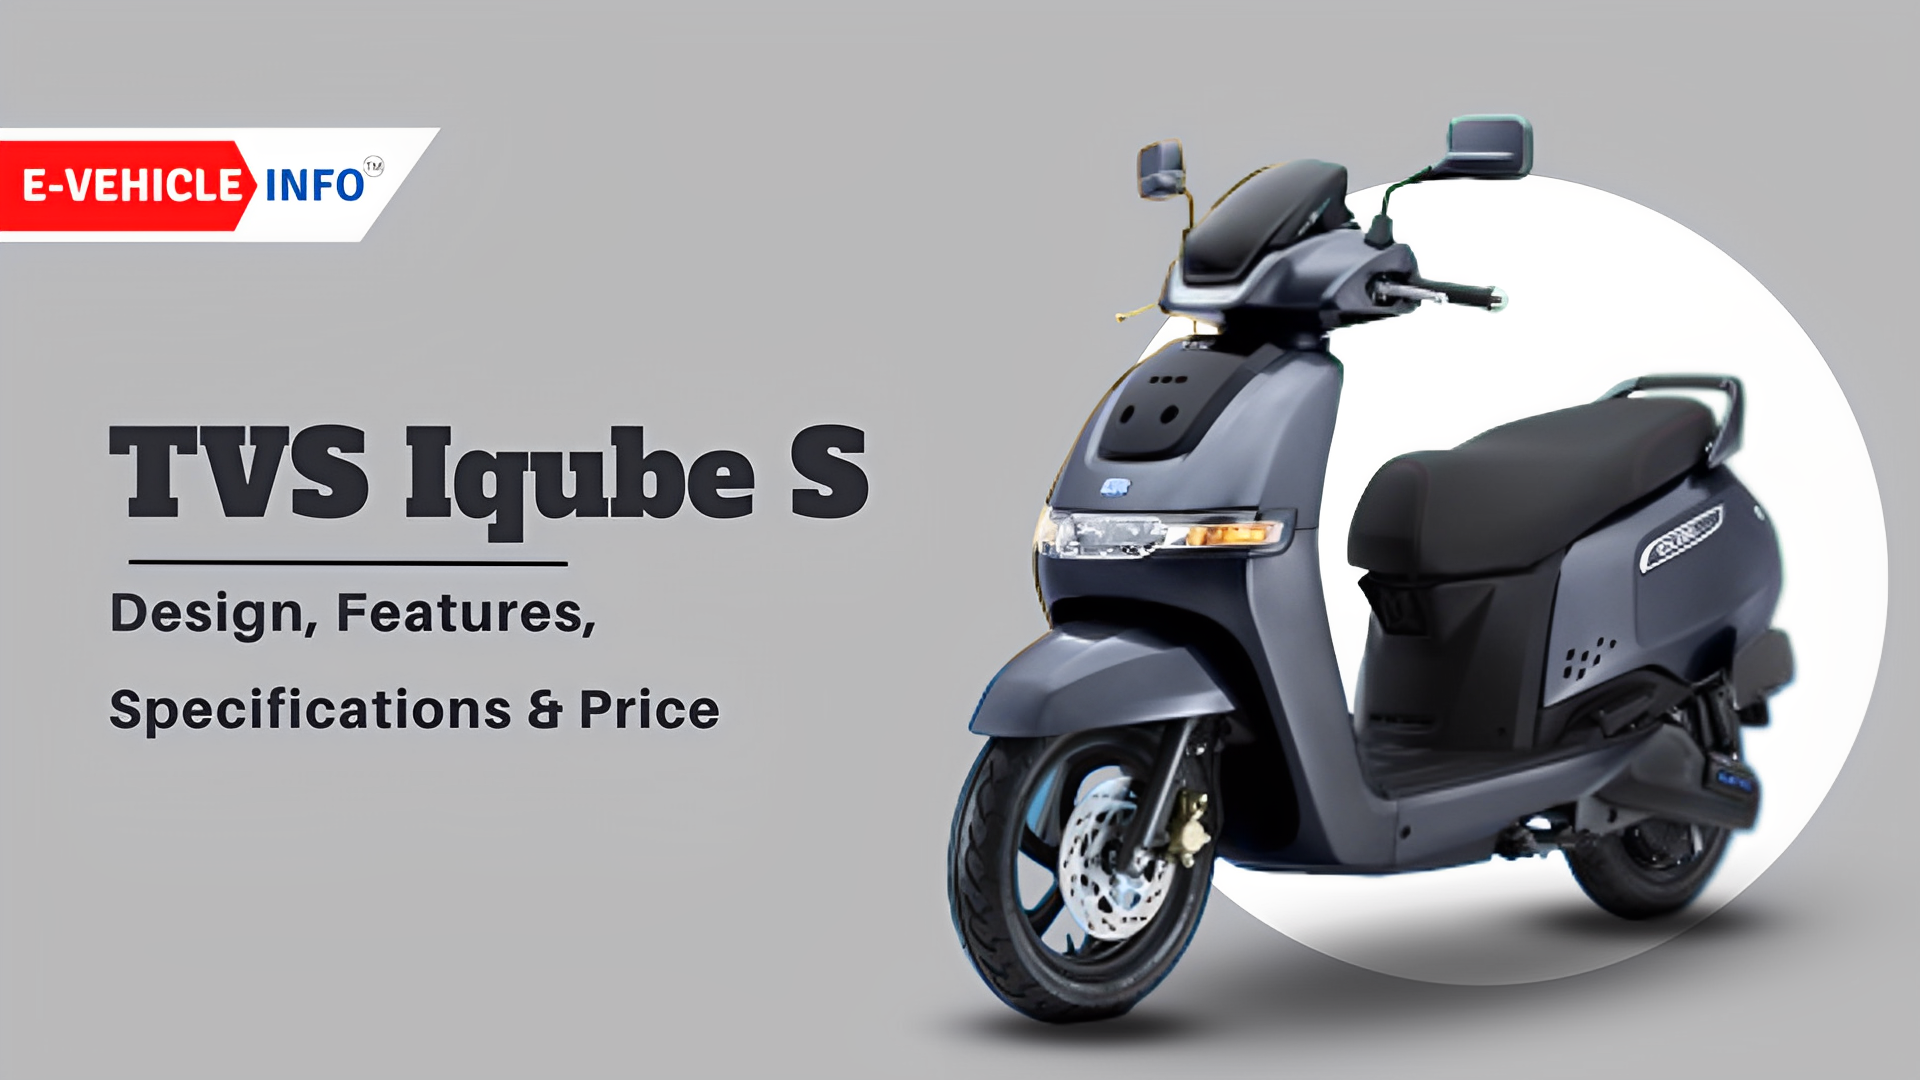 https://e-vehicleinfo.com/tvs-iqube-s-design-features-specifications-price/